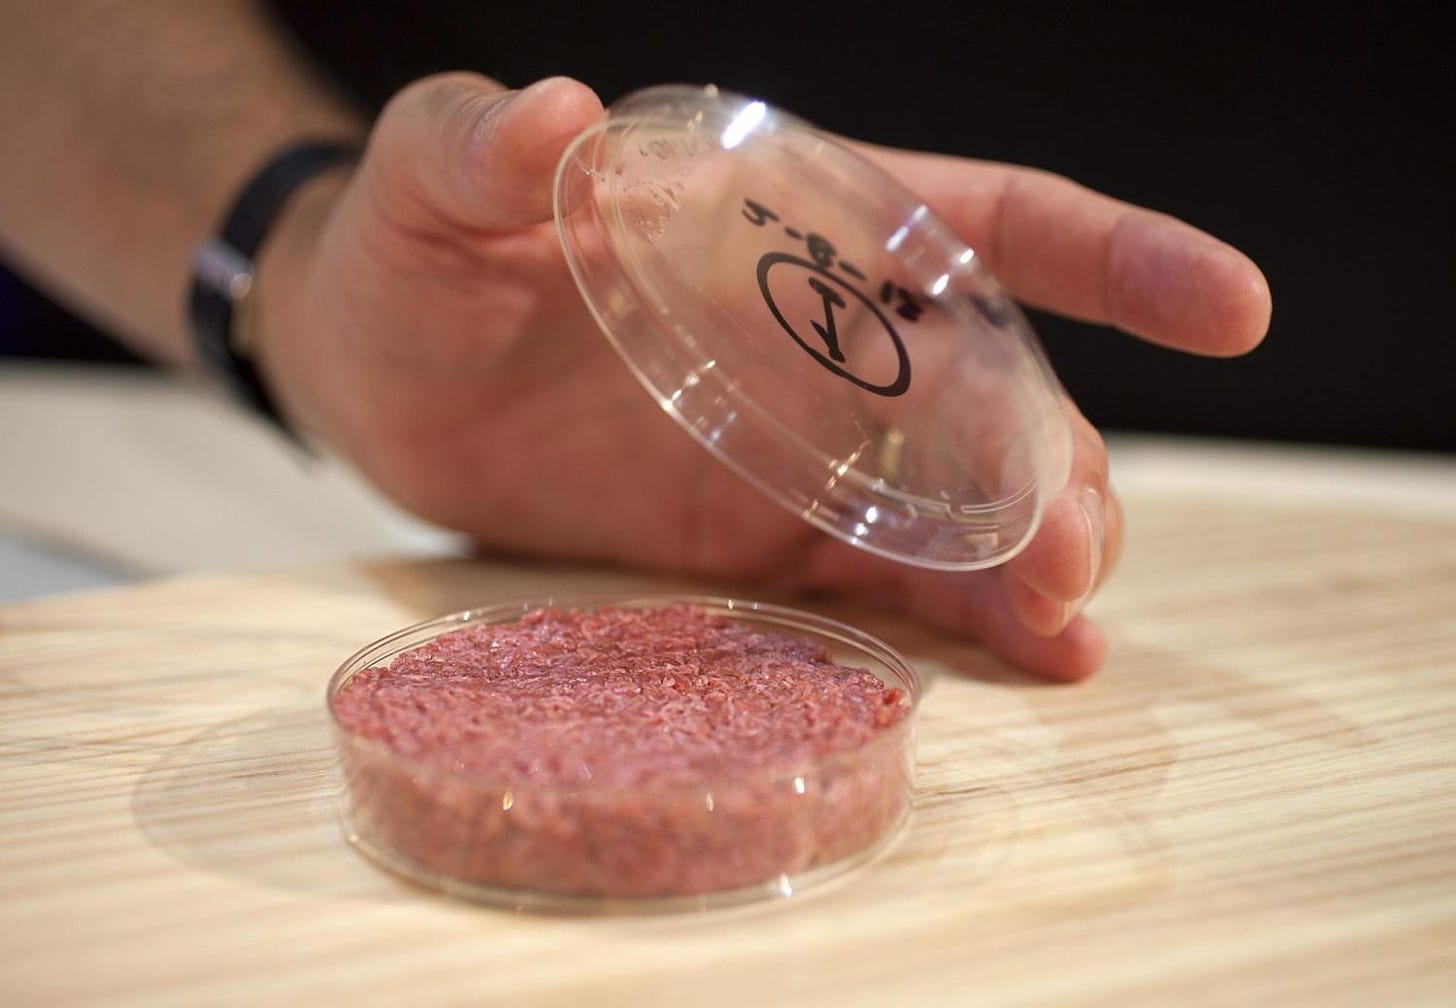 Lab Grown Meat - An Emerging Industry | Environmental Center | University  of Colorado Boulder